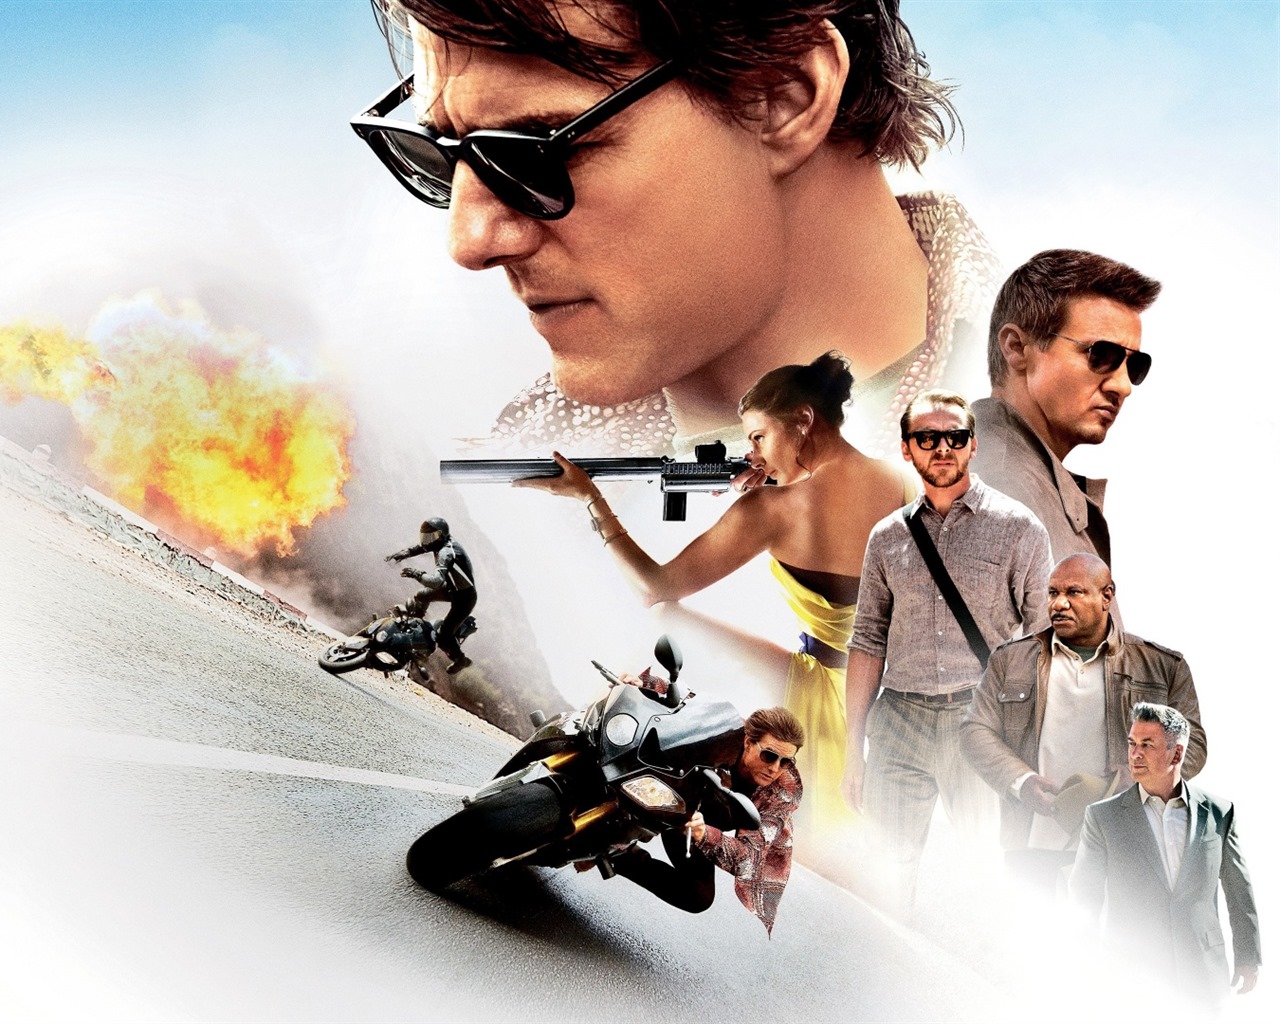 Mission Impossible: Rogue Nation, HD movie wallpapers #1 - 1280x1024